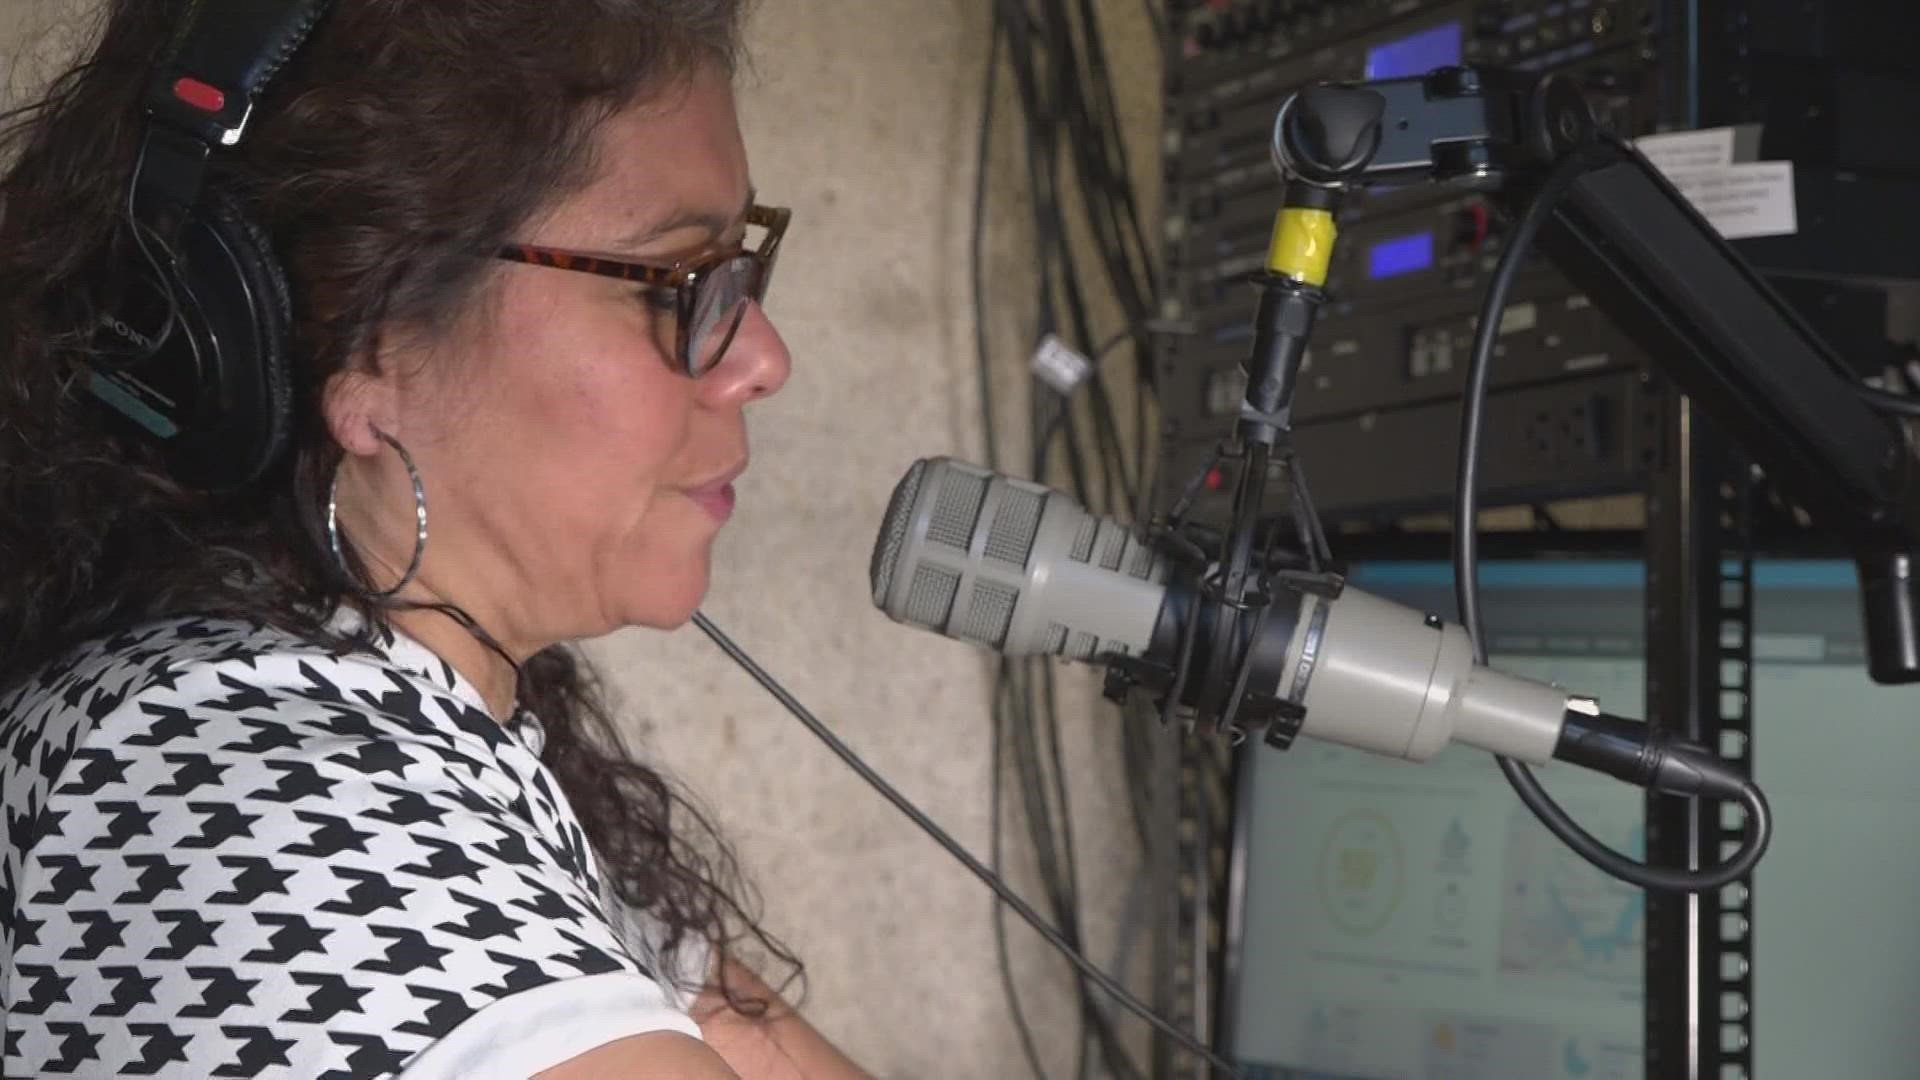 Rosita has been doing the radio shows on WMPG for almost three decades. You can listen to it every Saturday from 9 a.m. to 10:30 a.m. on 90.9 FM.